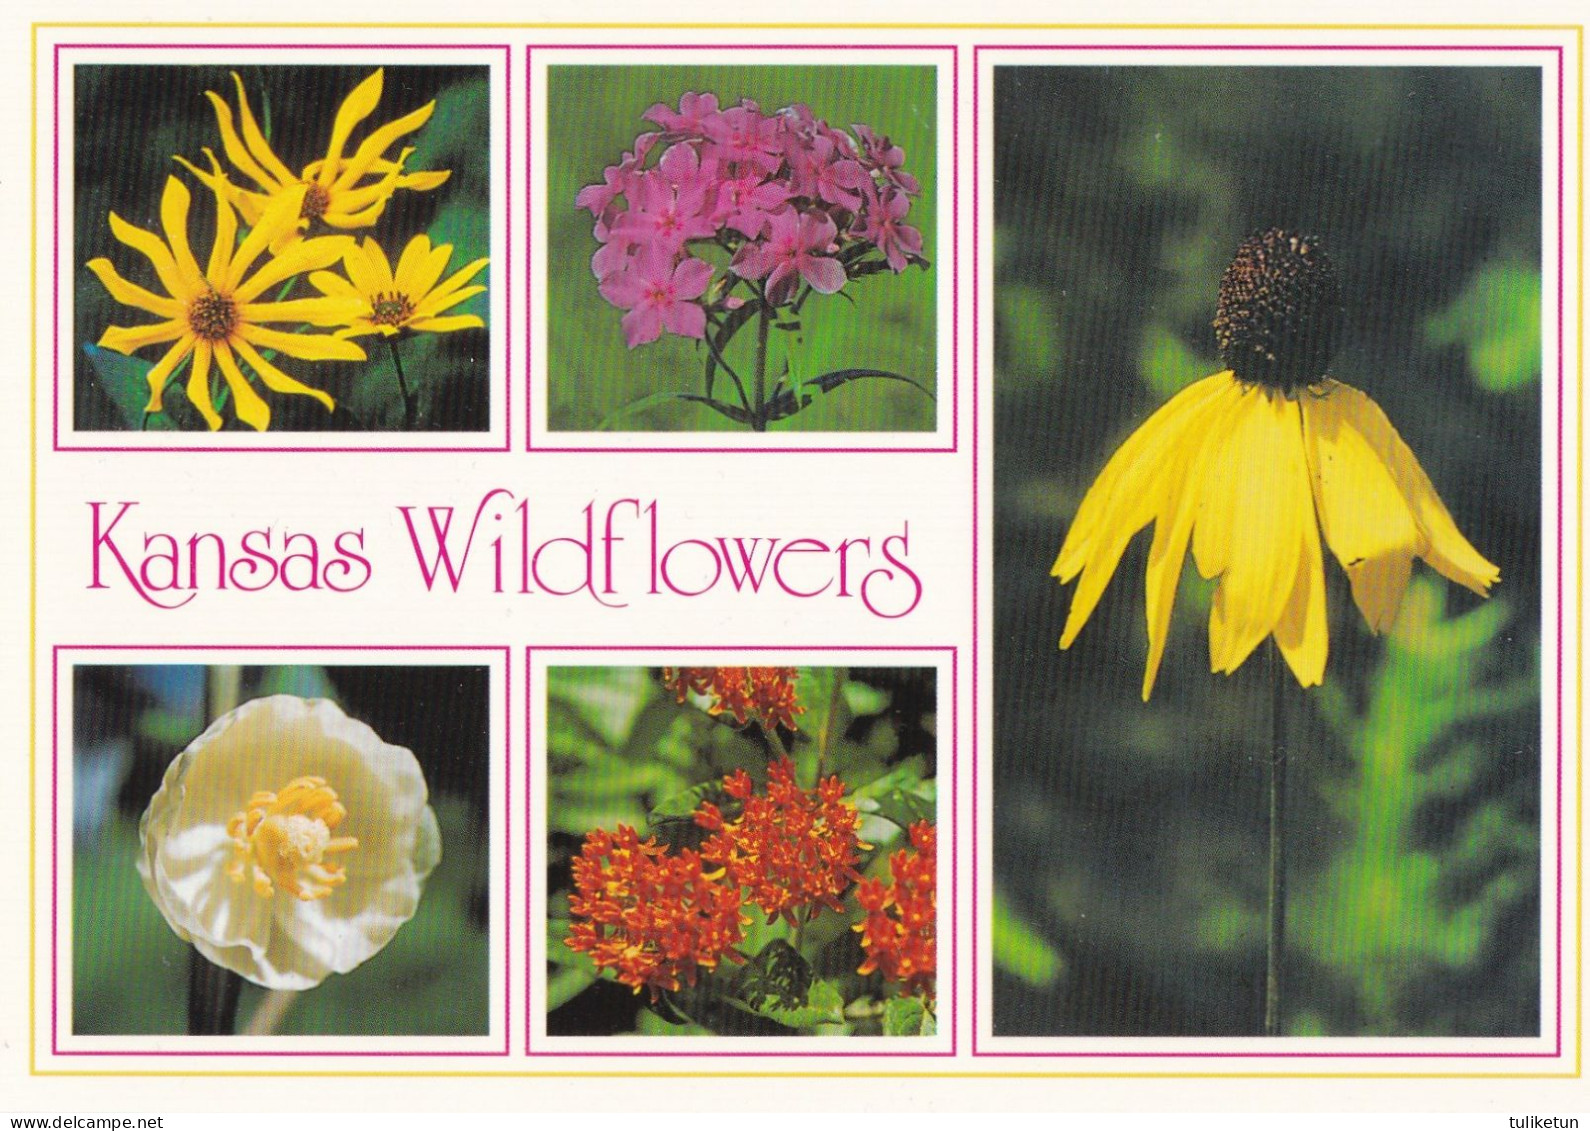 Kansas Wildflowers - Insects